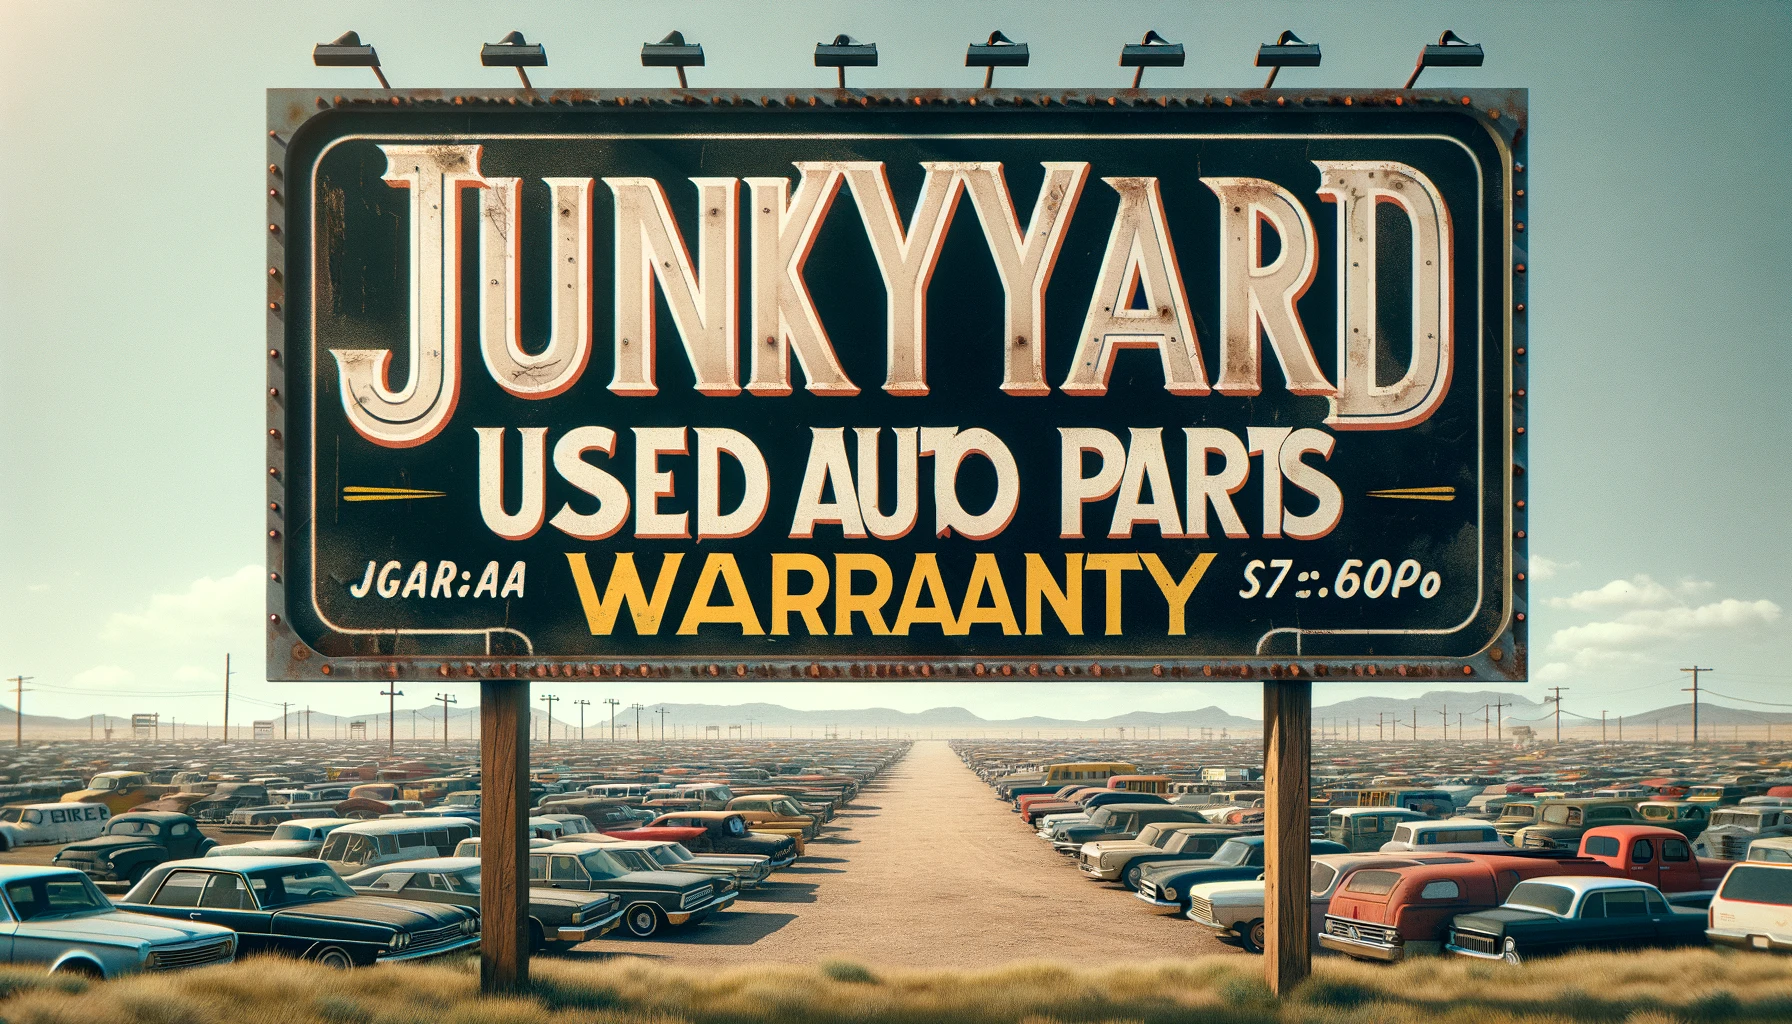 Used Auto Parts Warranty: Salvaged Bargains or Risky Business?